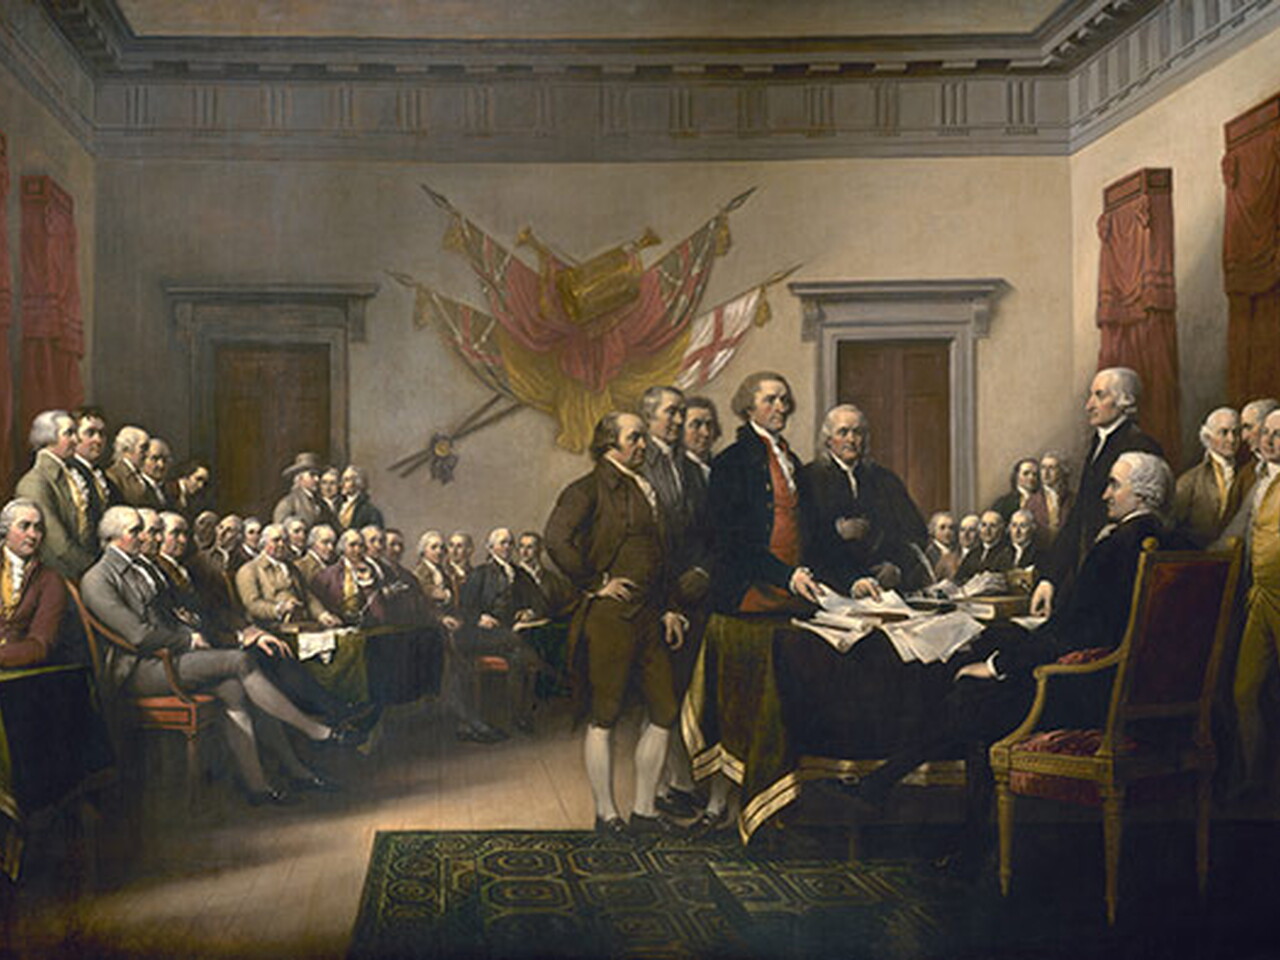 John Trumbull, Declaration of Independence, oil on canvas, 1818; placed in the Rotunda of the US Capitol, 1826 (Architect of the Capitol)